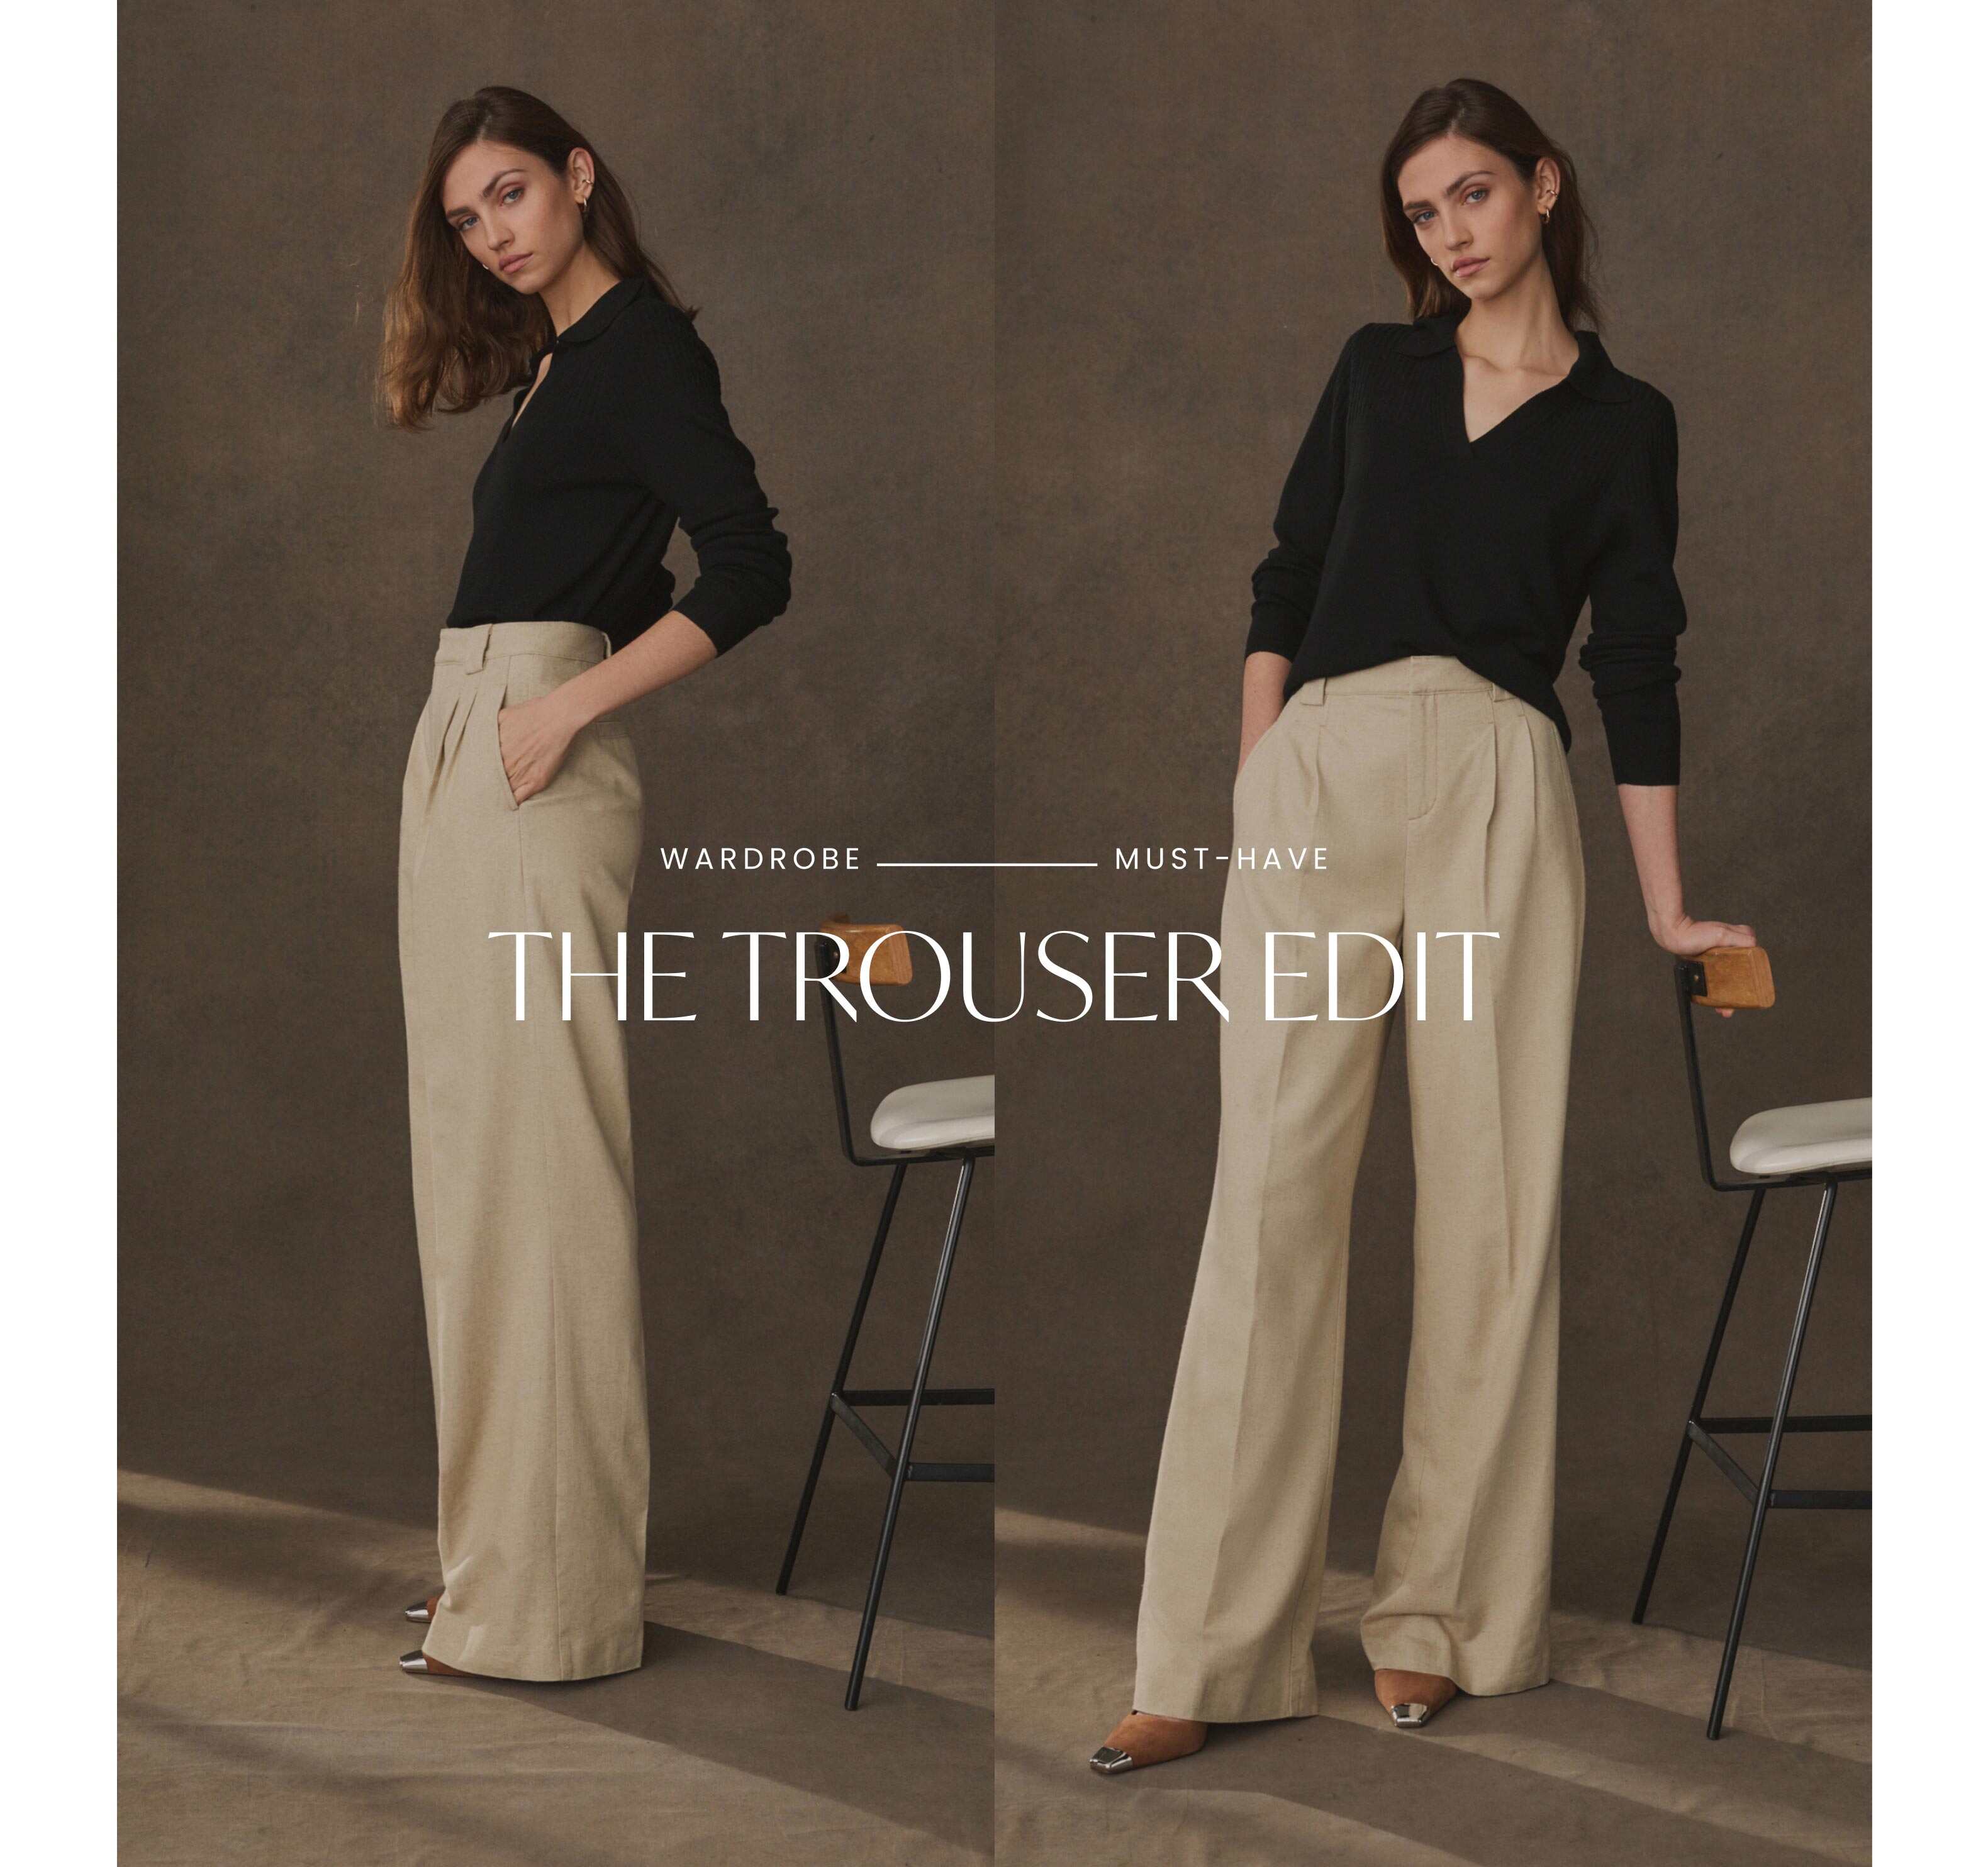 Wardrobe Must-have - The Trouser Edit